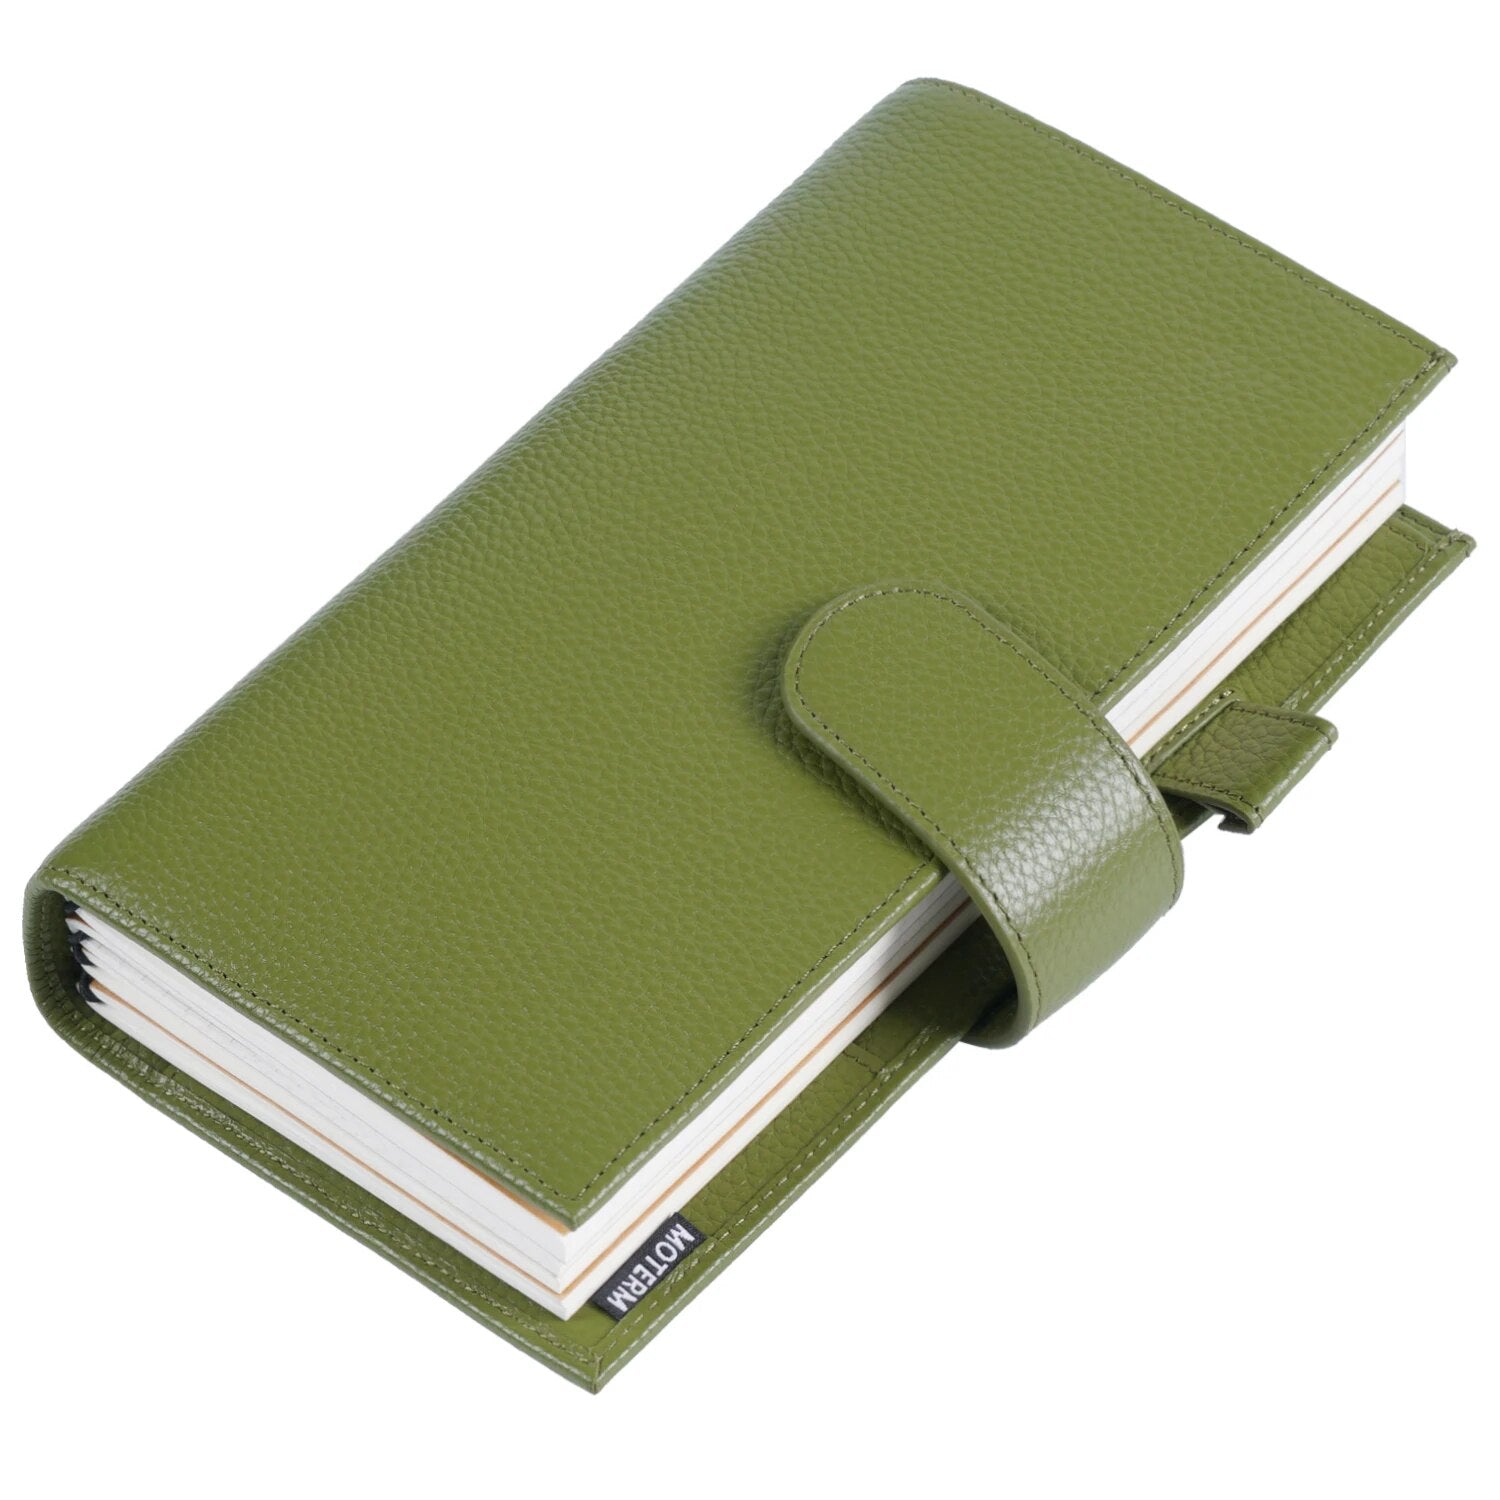 Moterm A5 Plus Green Genuine Leather Journal Cover Planner 